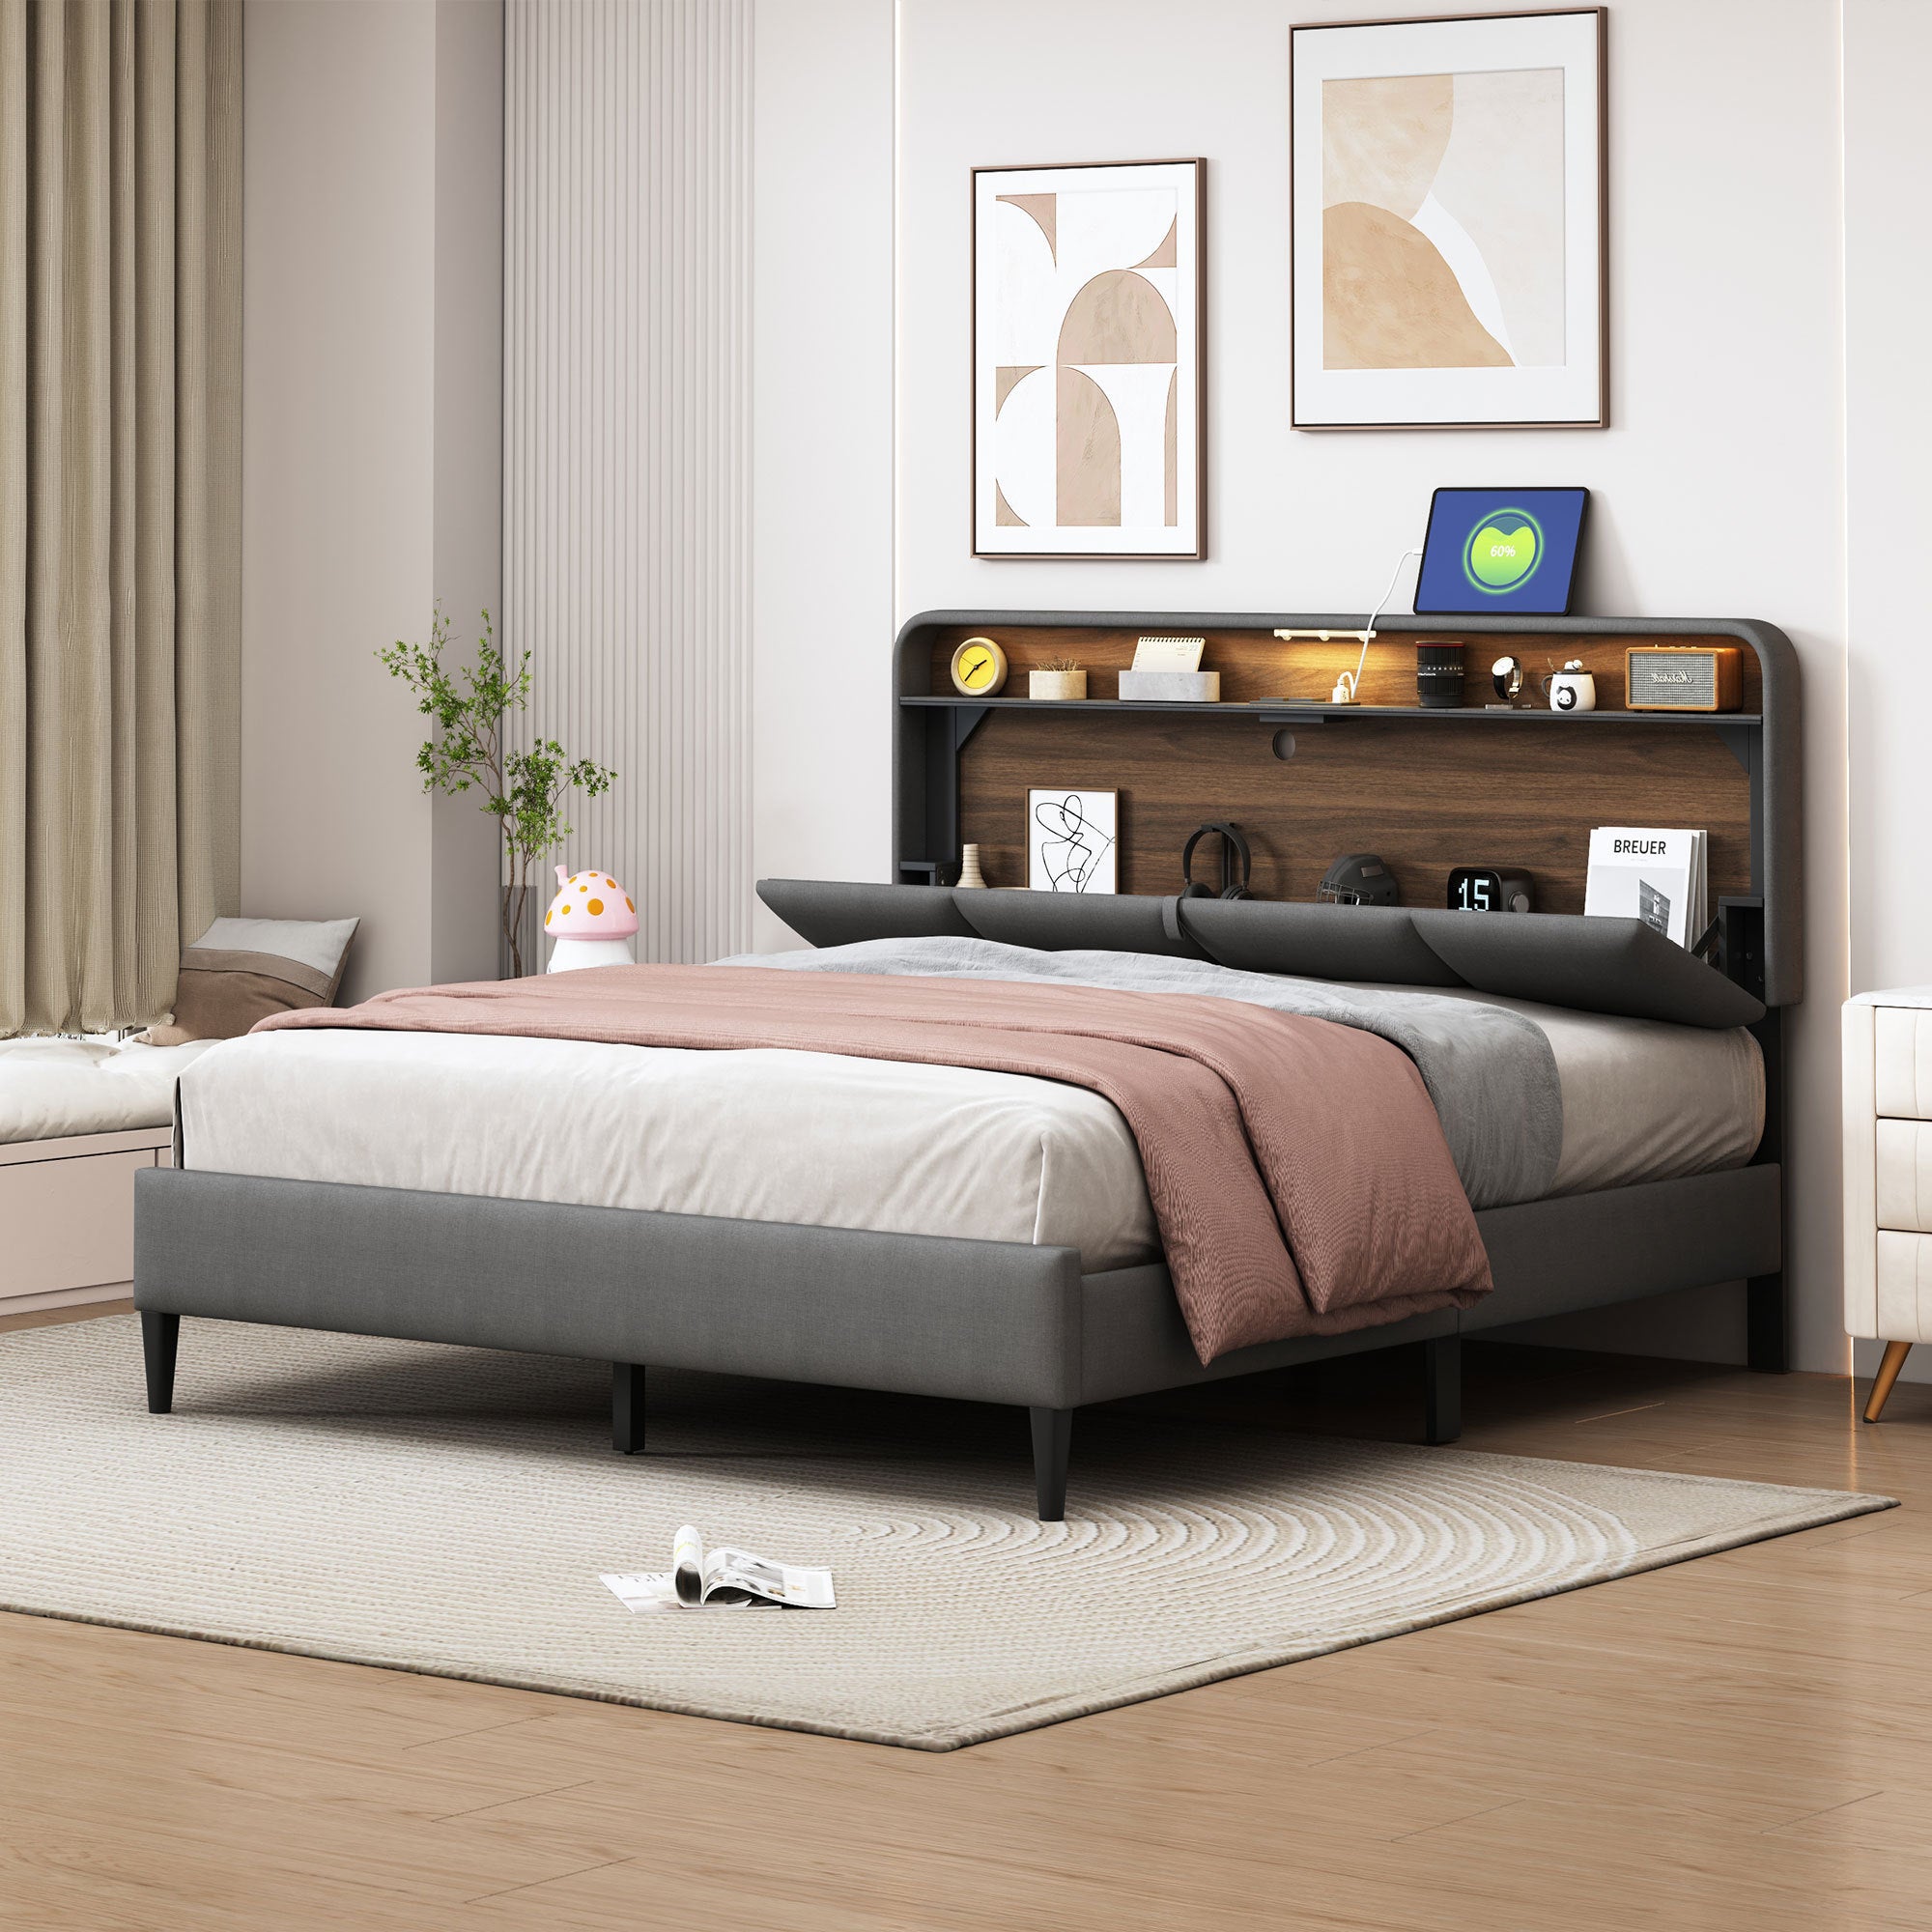 🆓🚛 Queen size Upholstered Platform Bed with Storage Headboard, Sensor Light and a set of Sockets and USB Ports, Linen Fabric, Gray